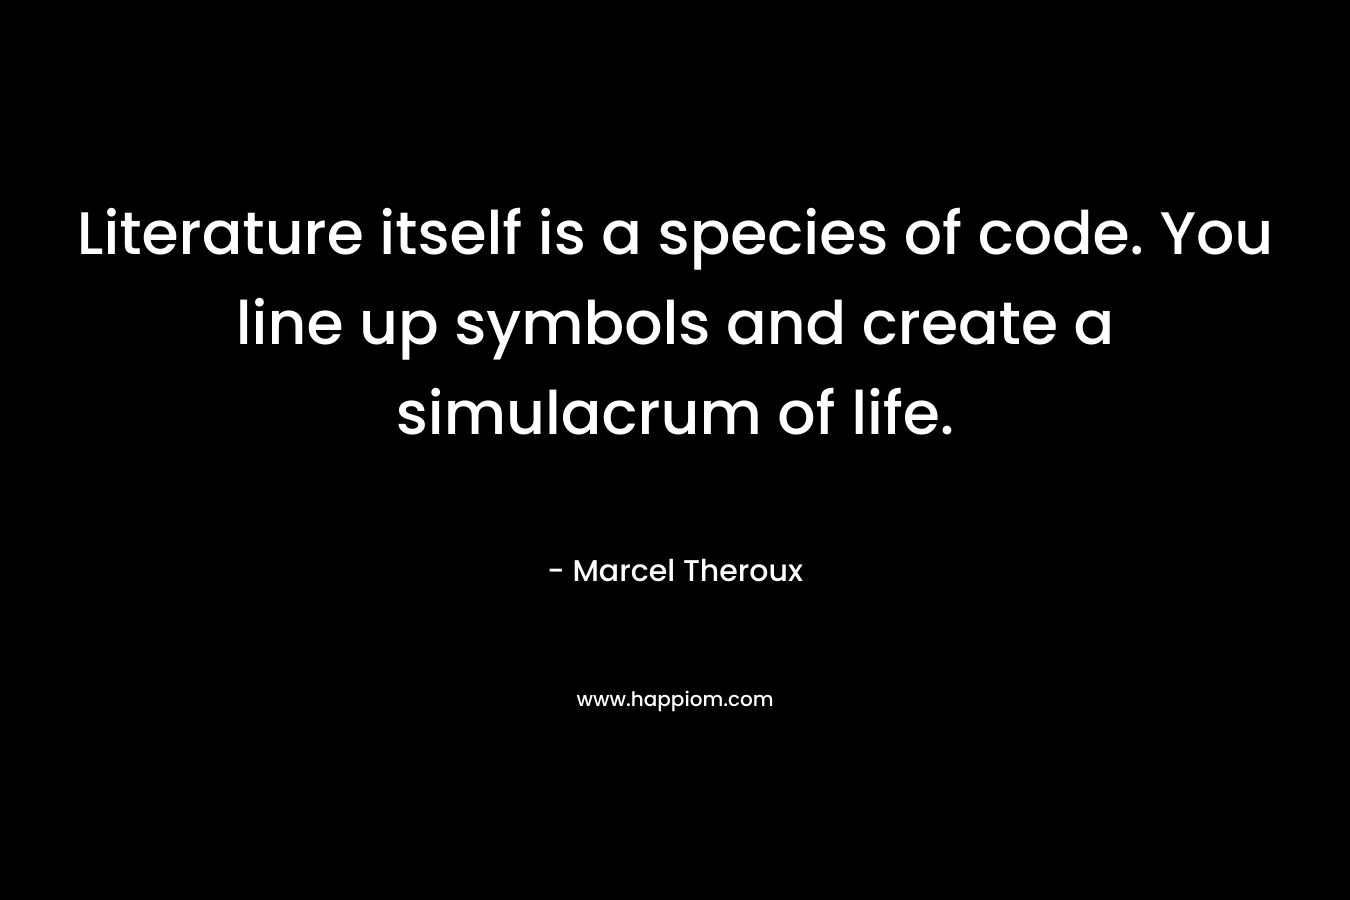 Literature itself is a species of code. You line up symbols and create a simulacrum of life. – Marcel Theroux